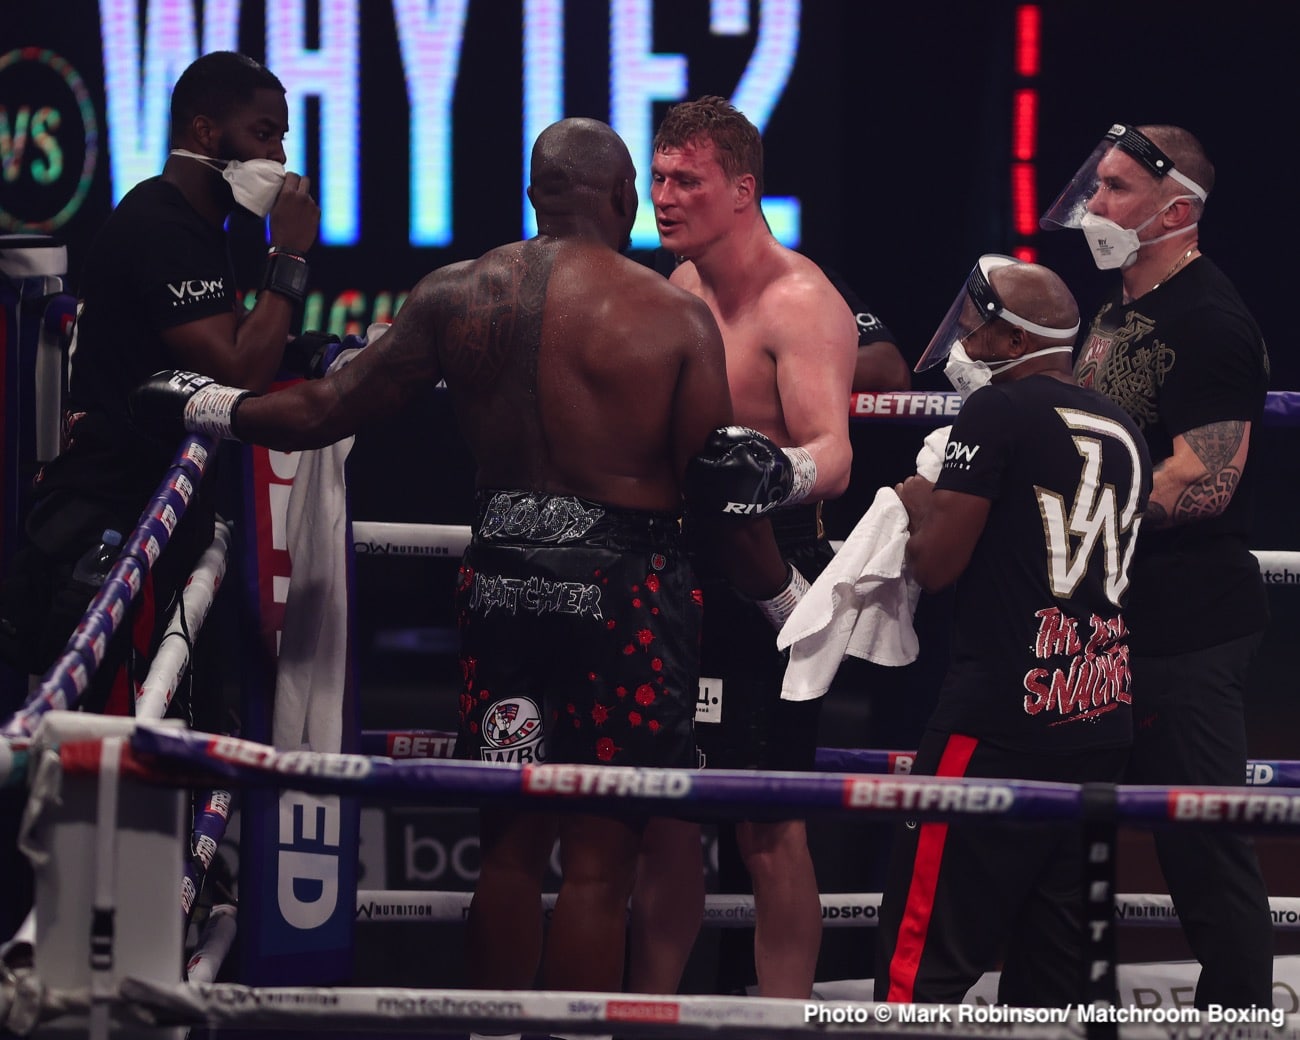 Dillian Whyte, Alexander Povetkin, Andy Ruiz Jr., Deontay Wilder, Eddie Hearn boxing photo and news image